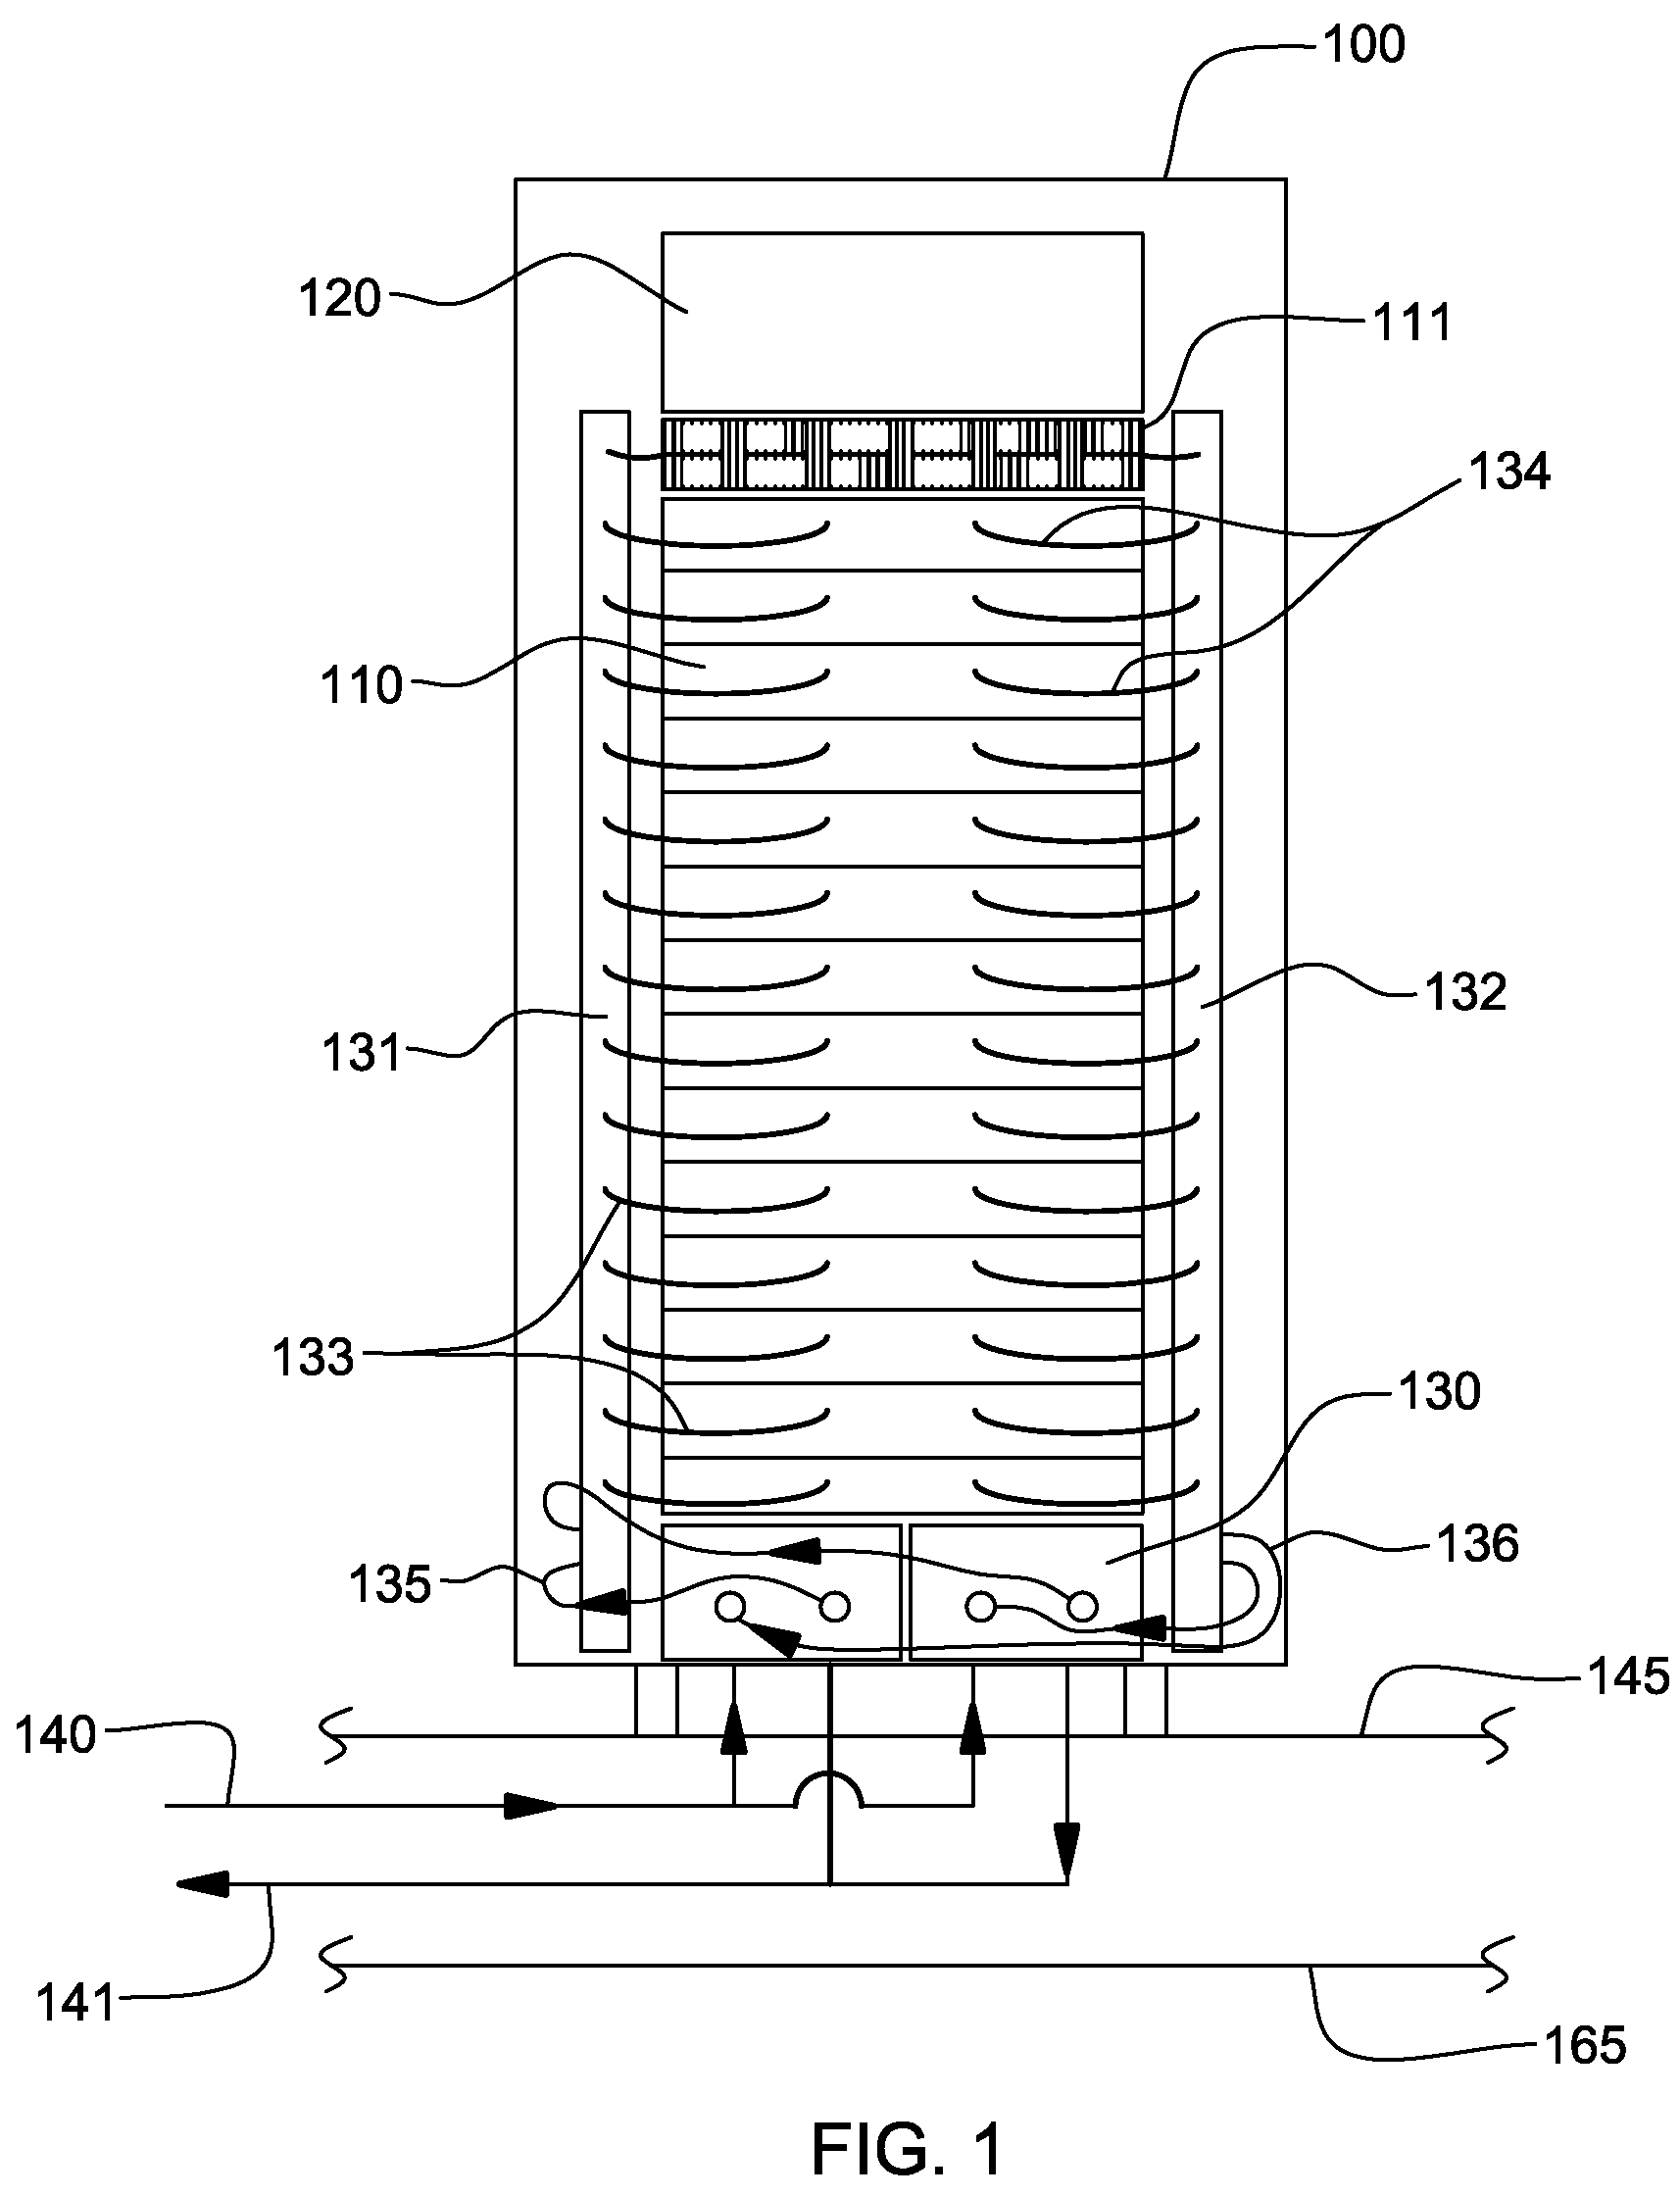 Compliant conduction rail assembly and method facilitating cooling of an electronics structure